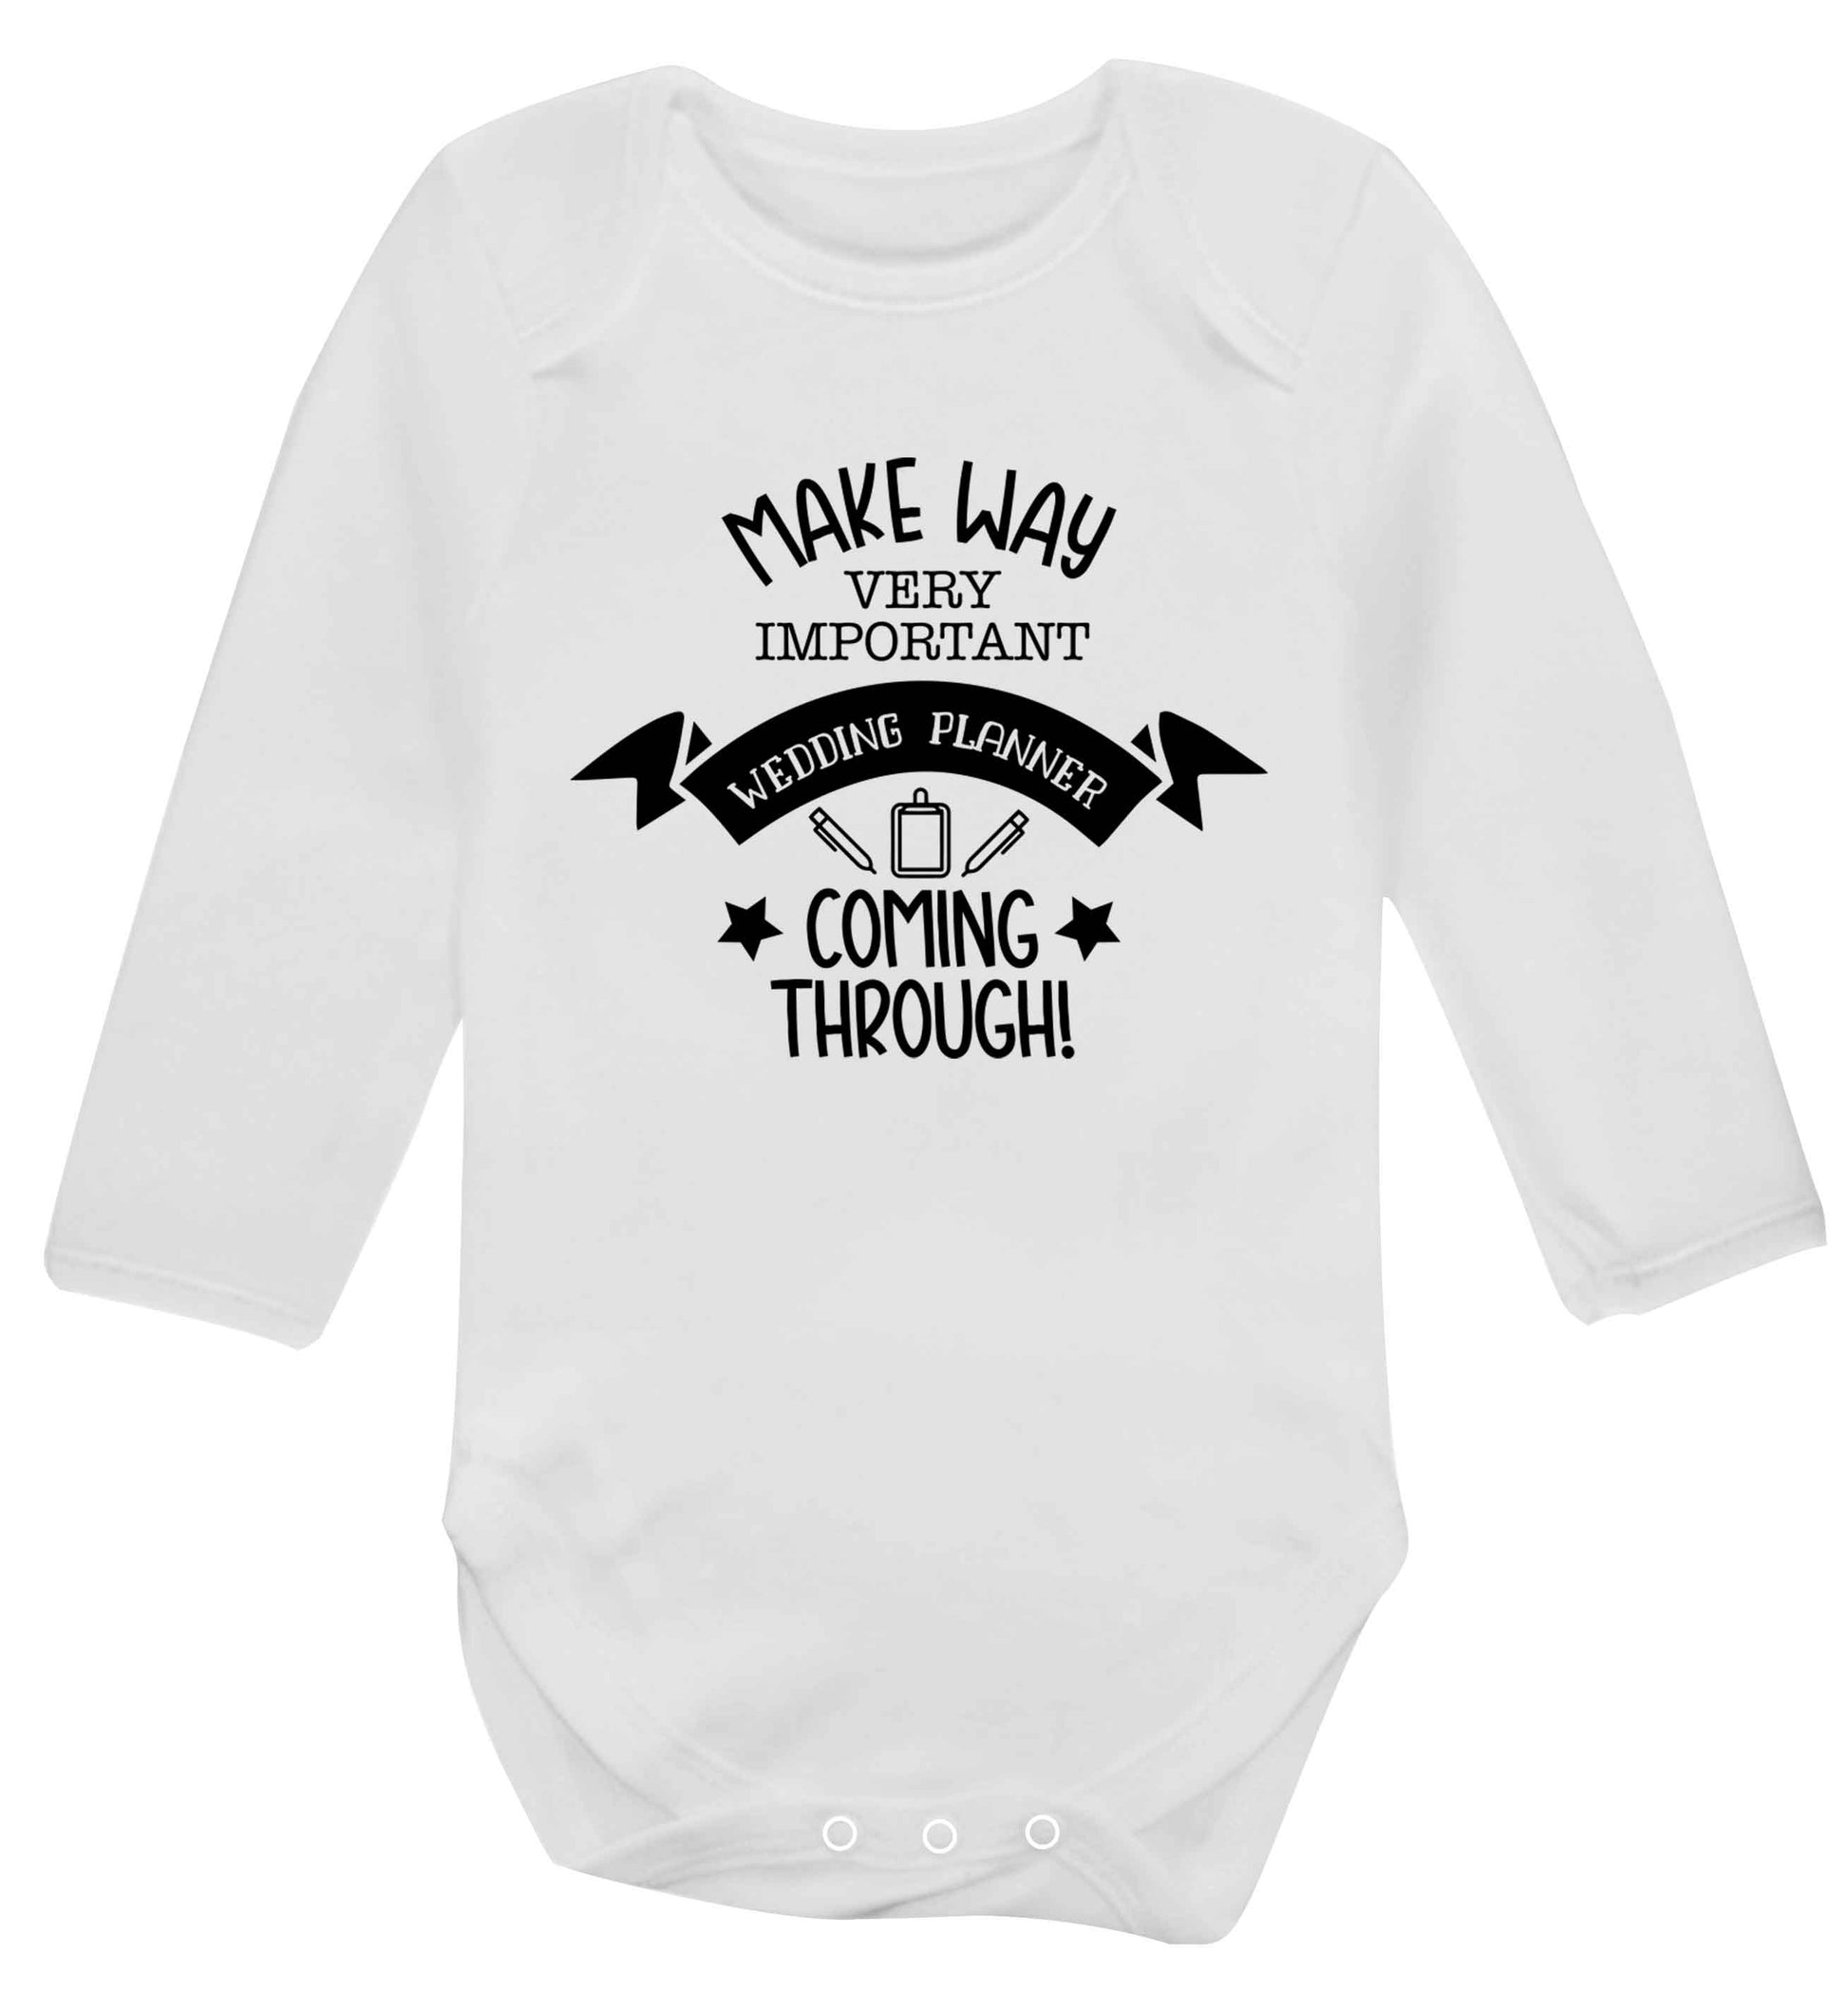 Make way very important wedding planner coming through Baby Vest long sleeved white 6-12 months